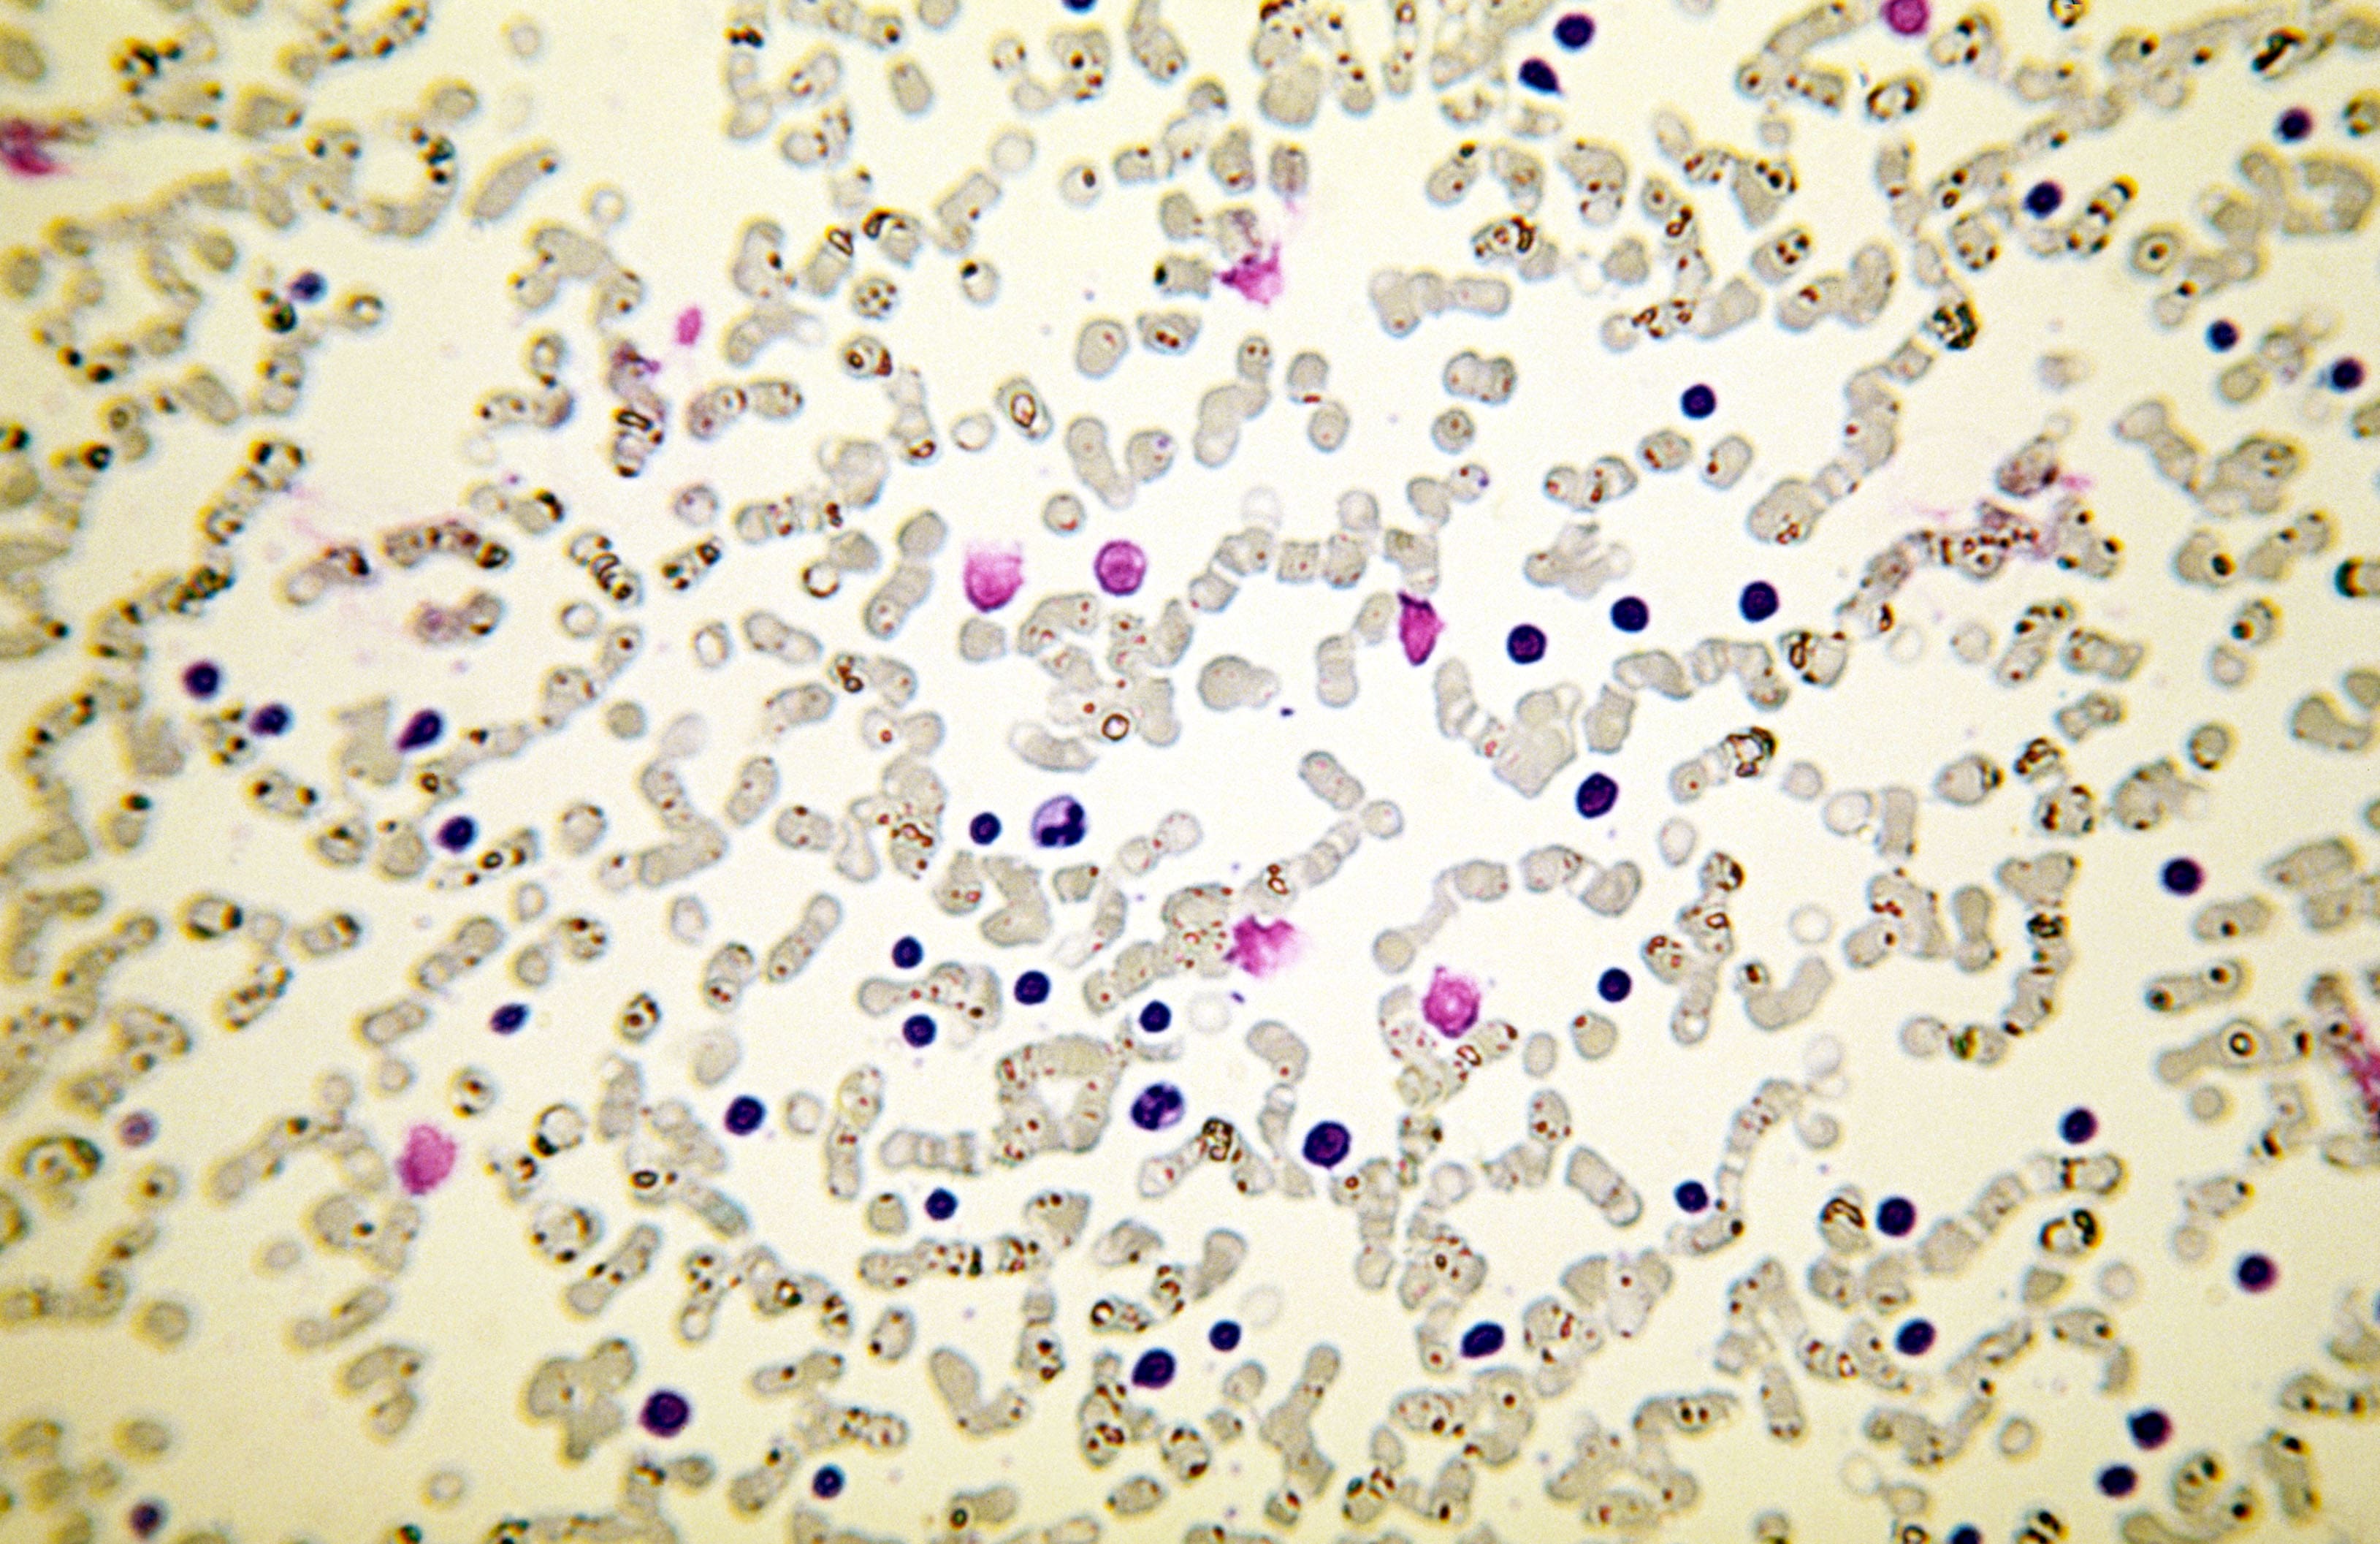 Smudge cells in peripheral blood